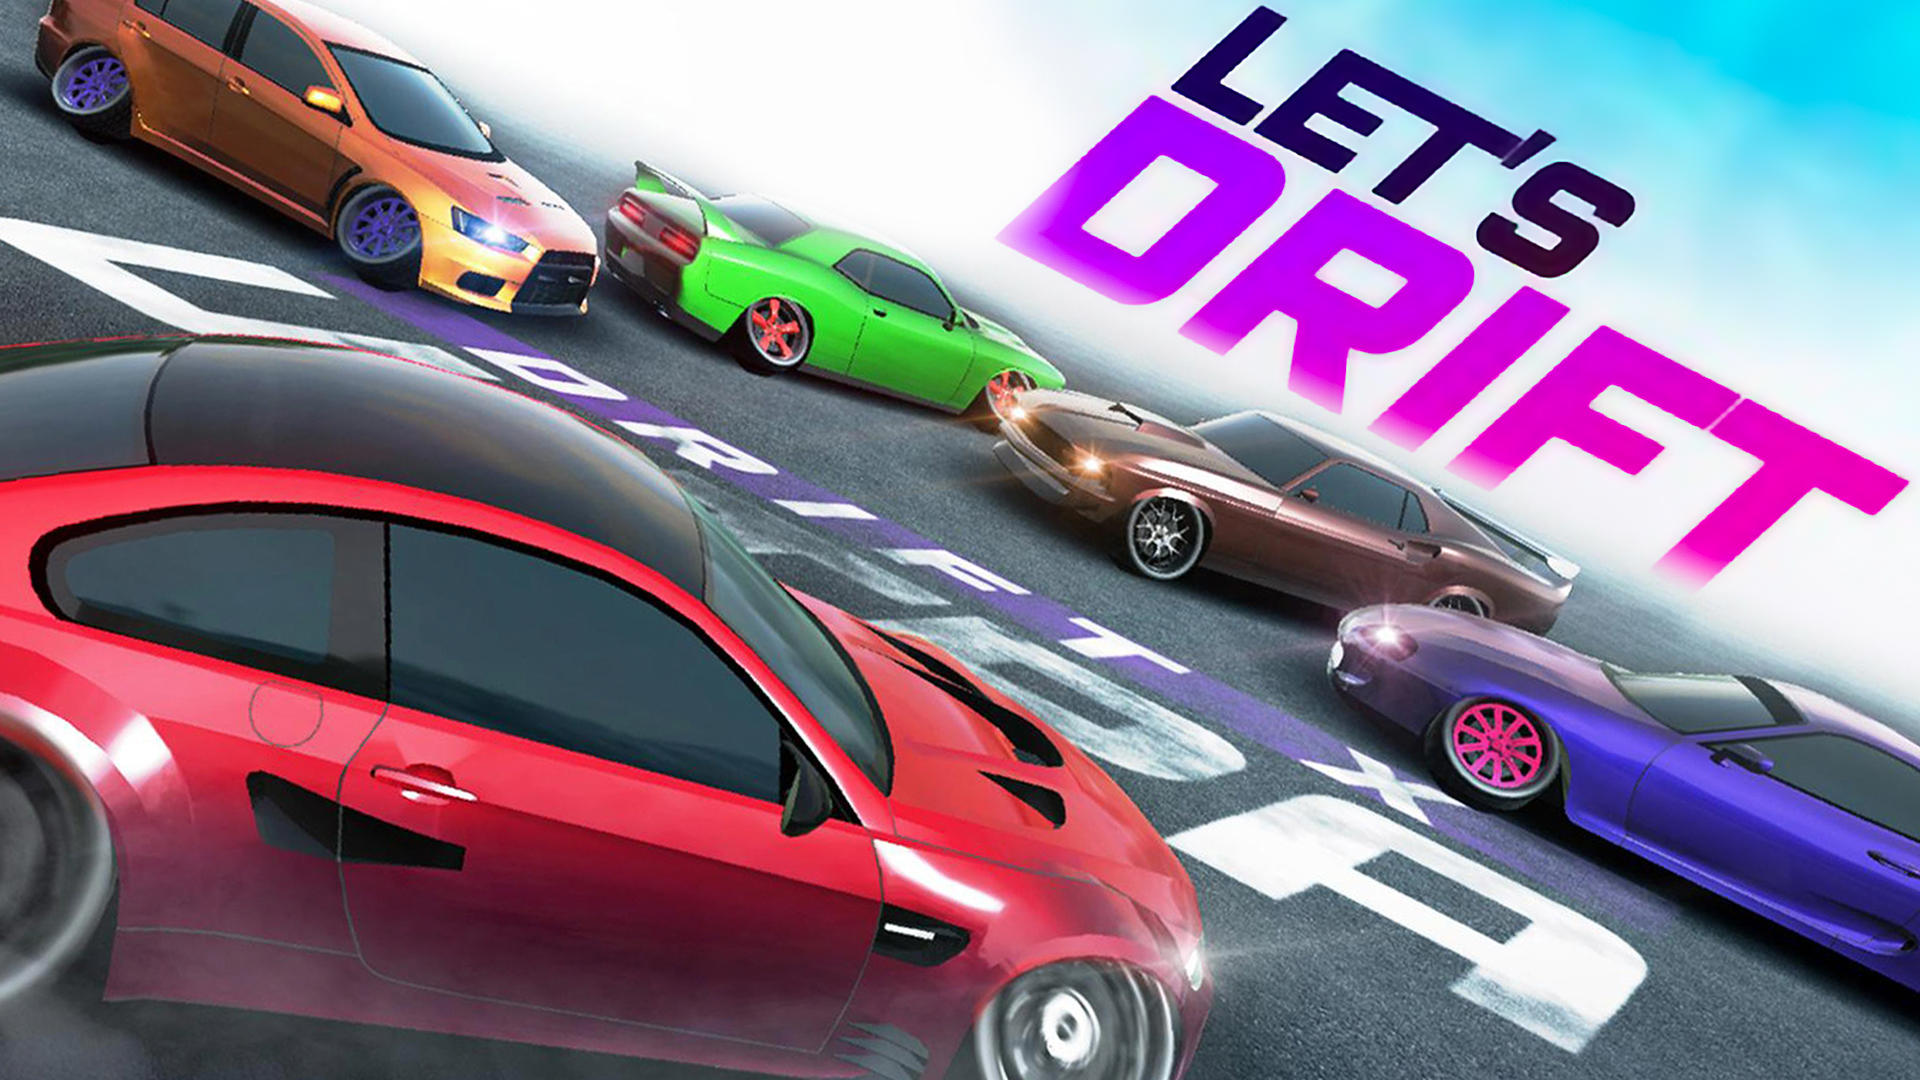 Top Drift - Online Car Racing Simulator Game for Android